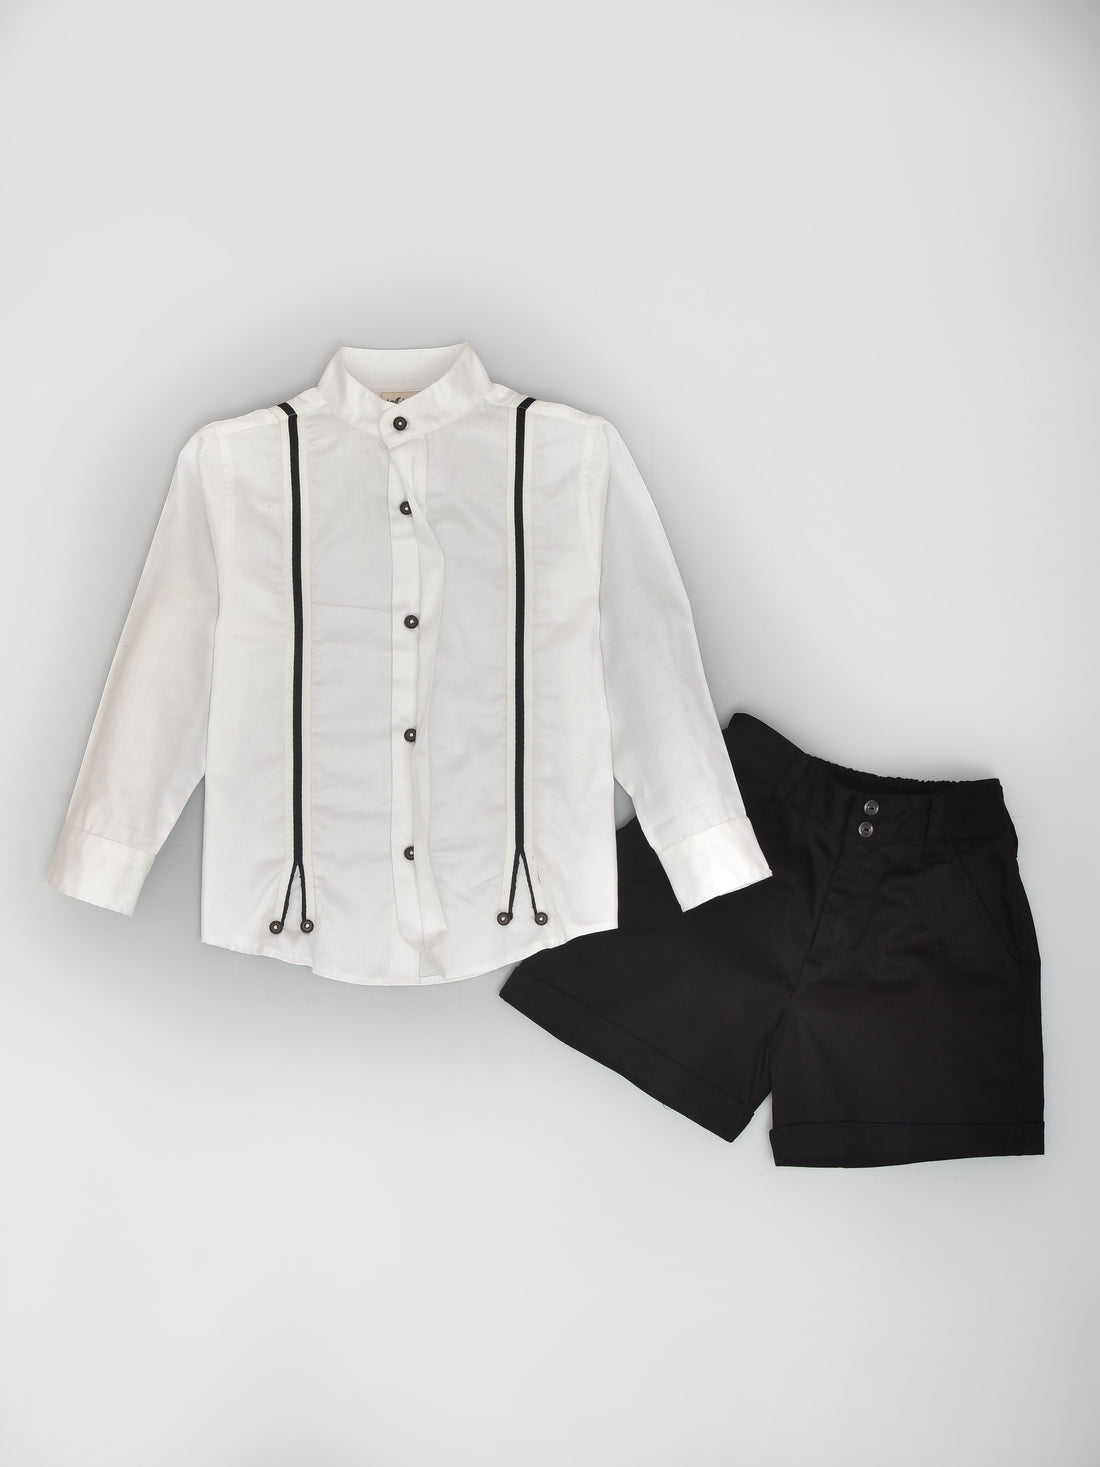 White Full Sleeve Shirt With Black Suspenders & Black Shorts Casual Set for Boys